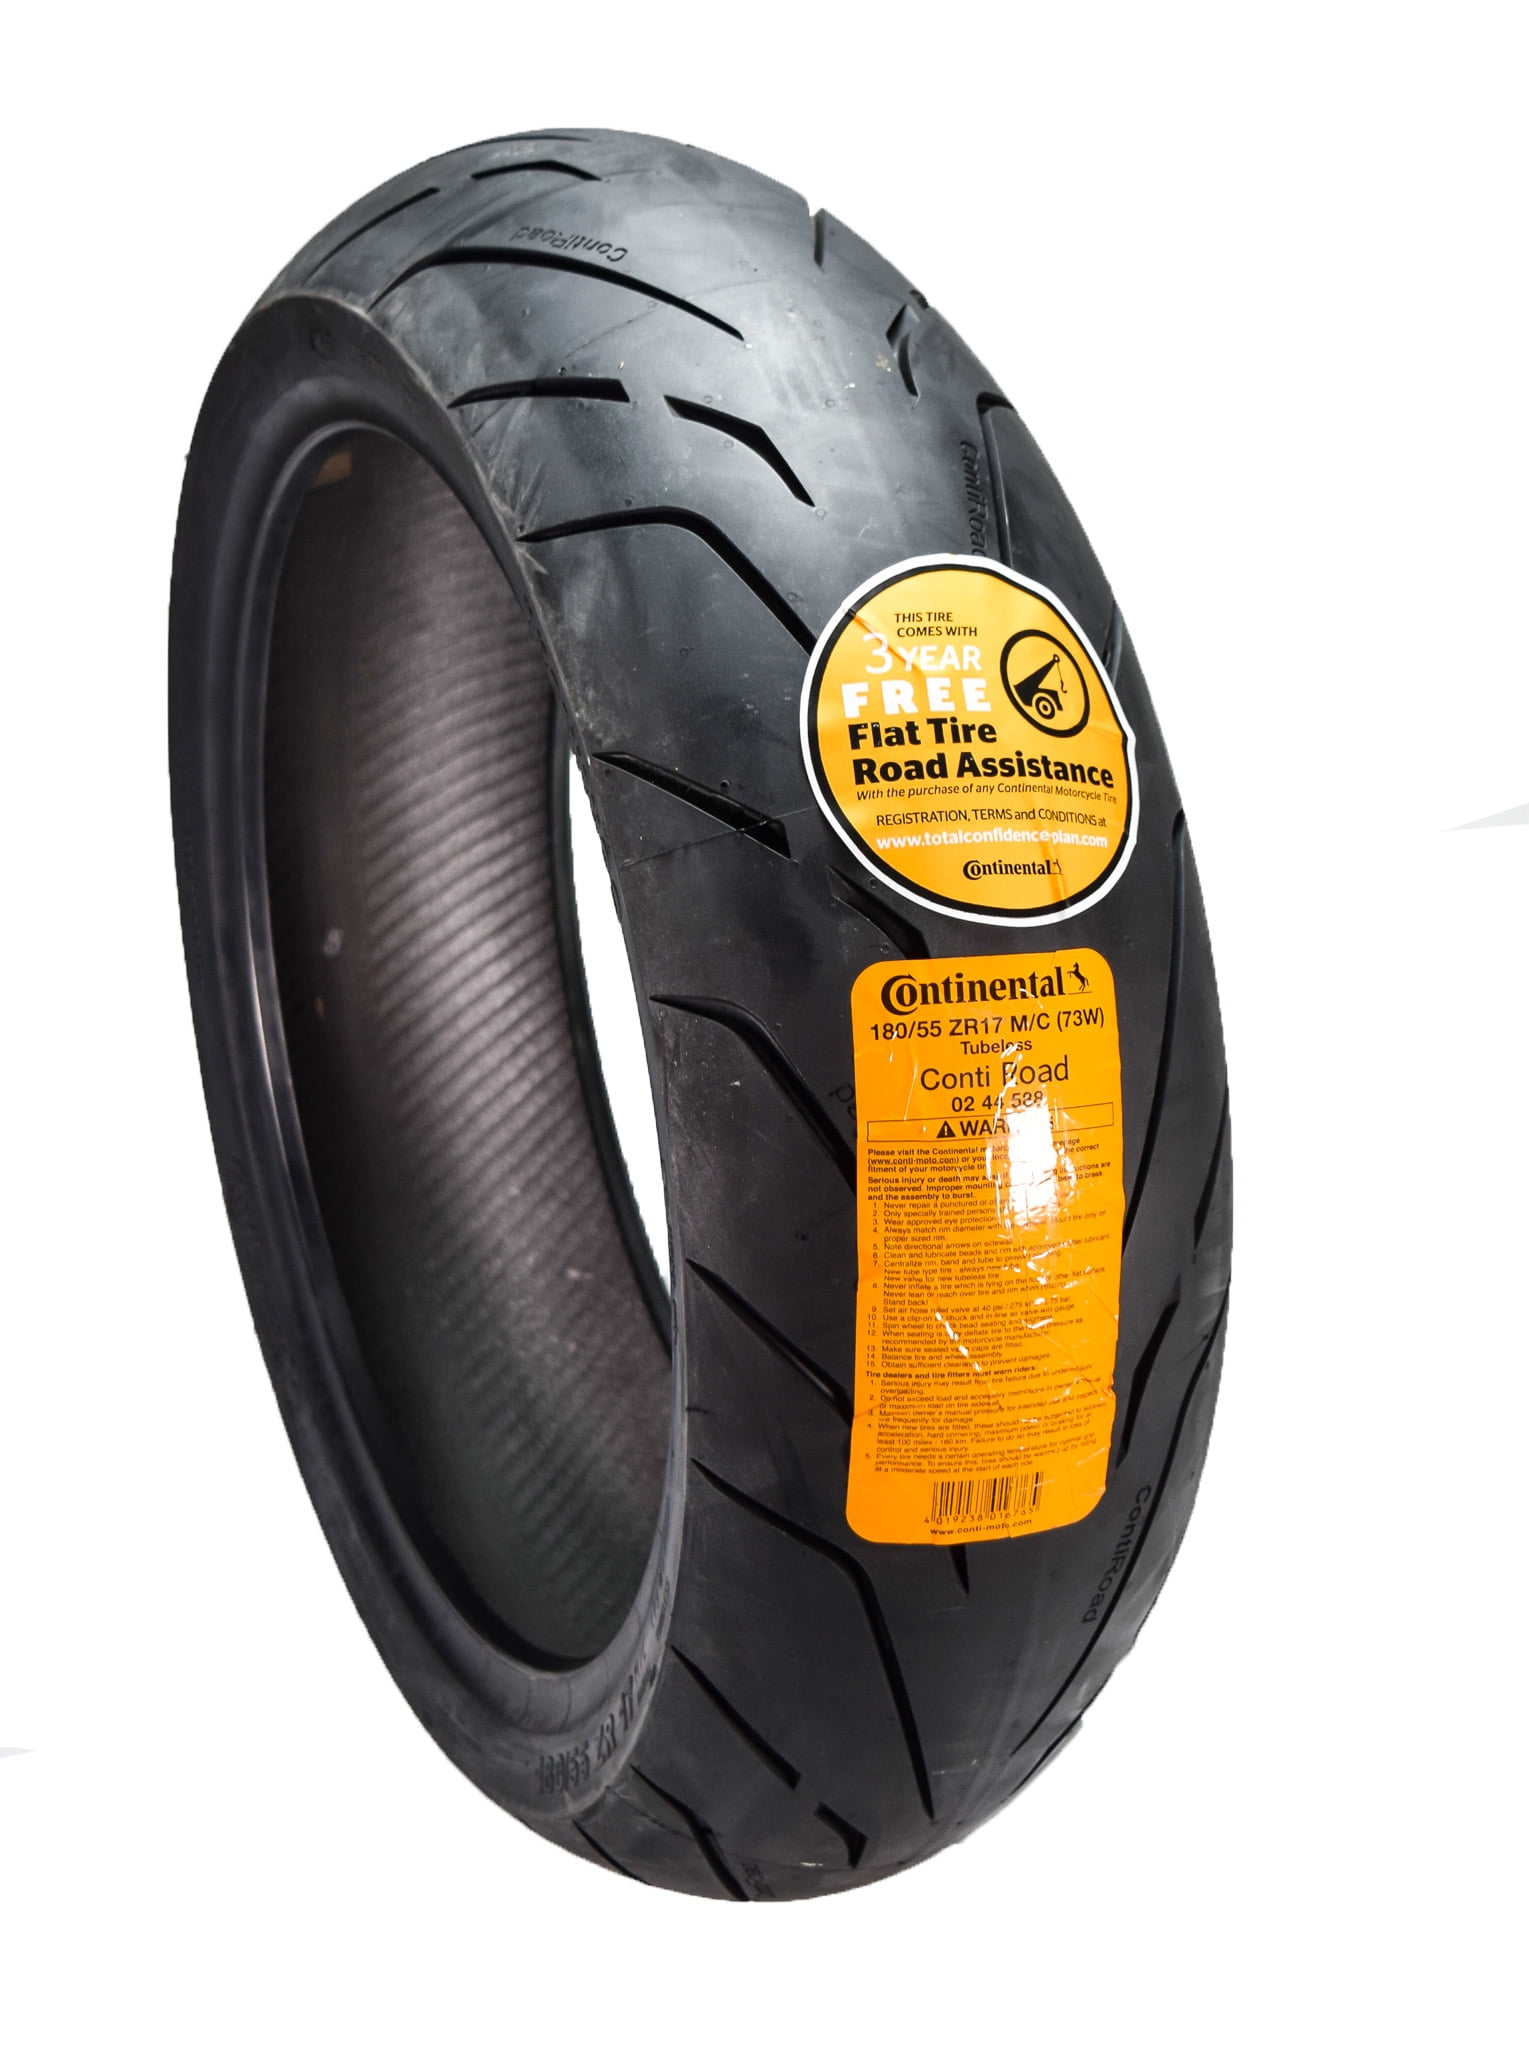 Tire Construction: Radial 02443550000 180/55ZR-17 Speed Rating: W Rear Tire Size: 180/55-17 Tire Type: Street Rim Size: 17 Continental Conti Road Attack 2 EVO Hyper Sport Touring Tire Tire Application: Touring Position: Rear Load Rating: 73 